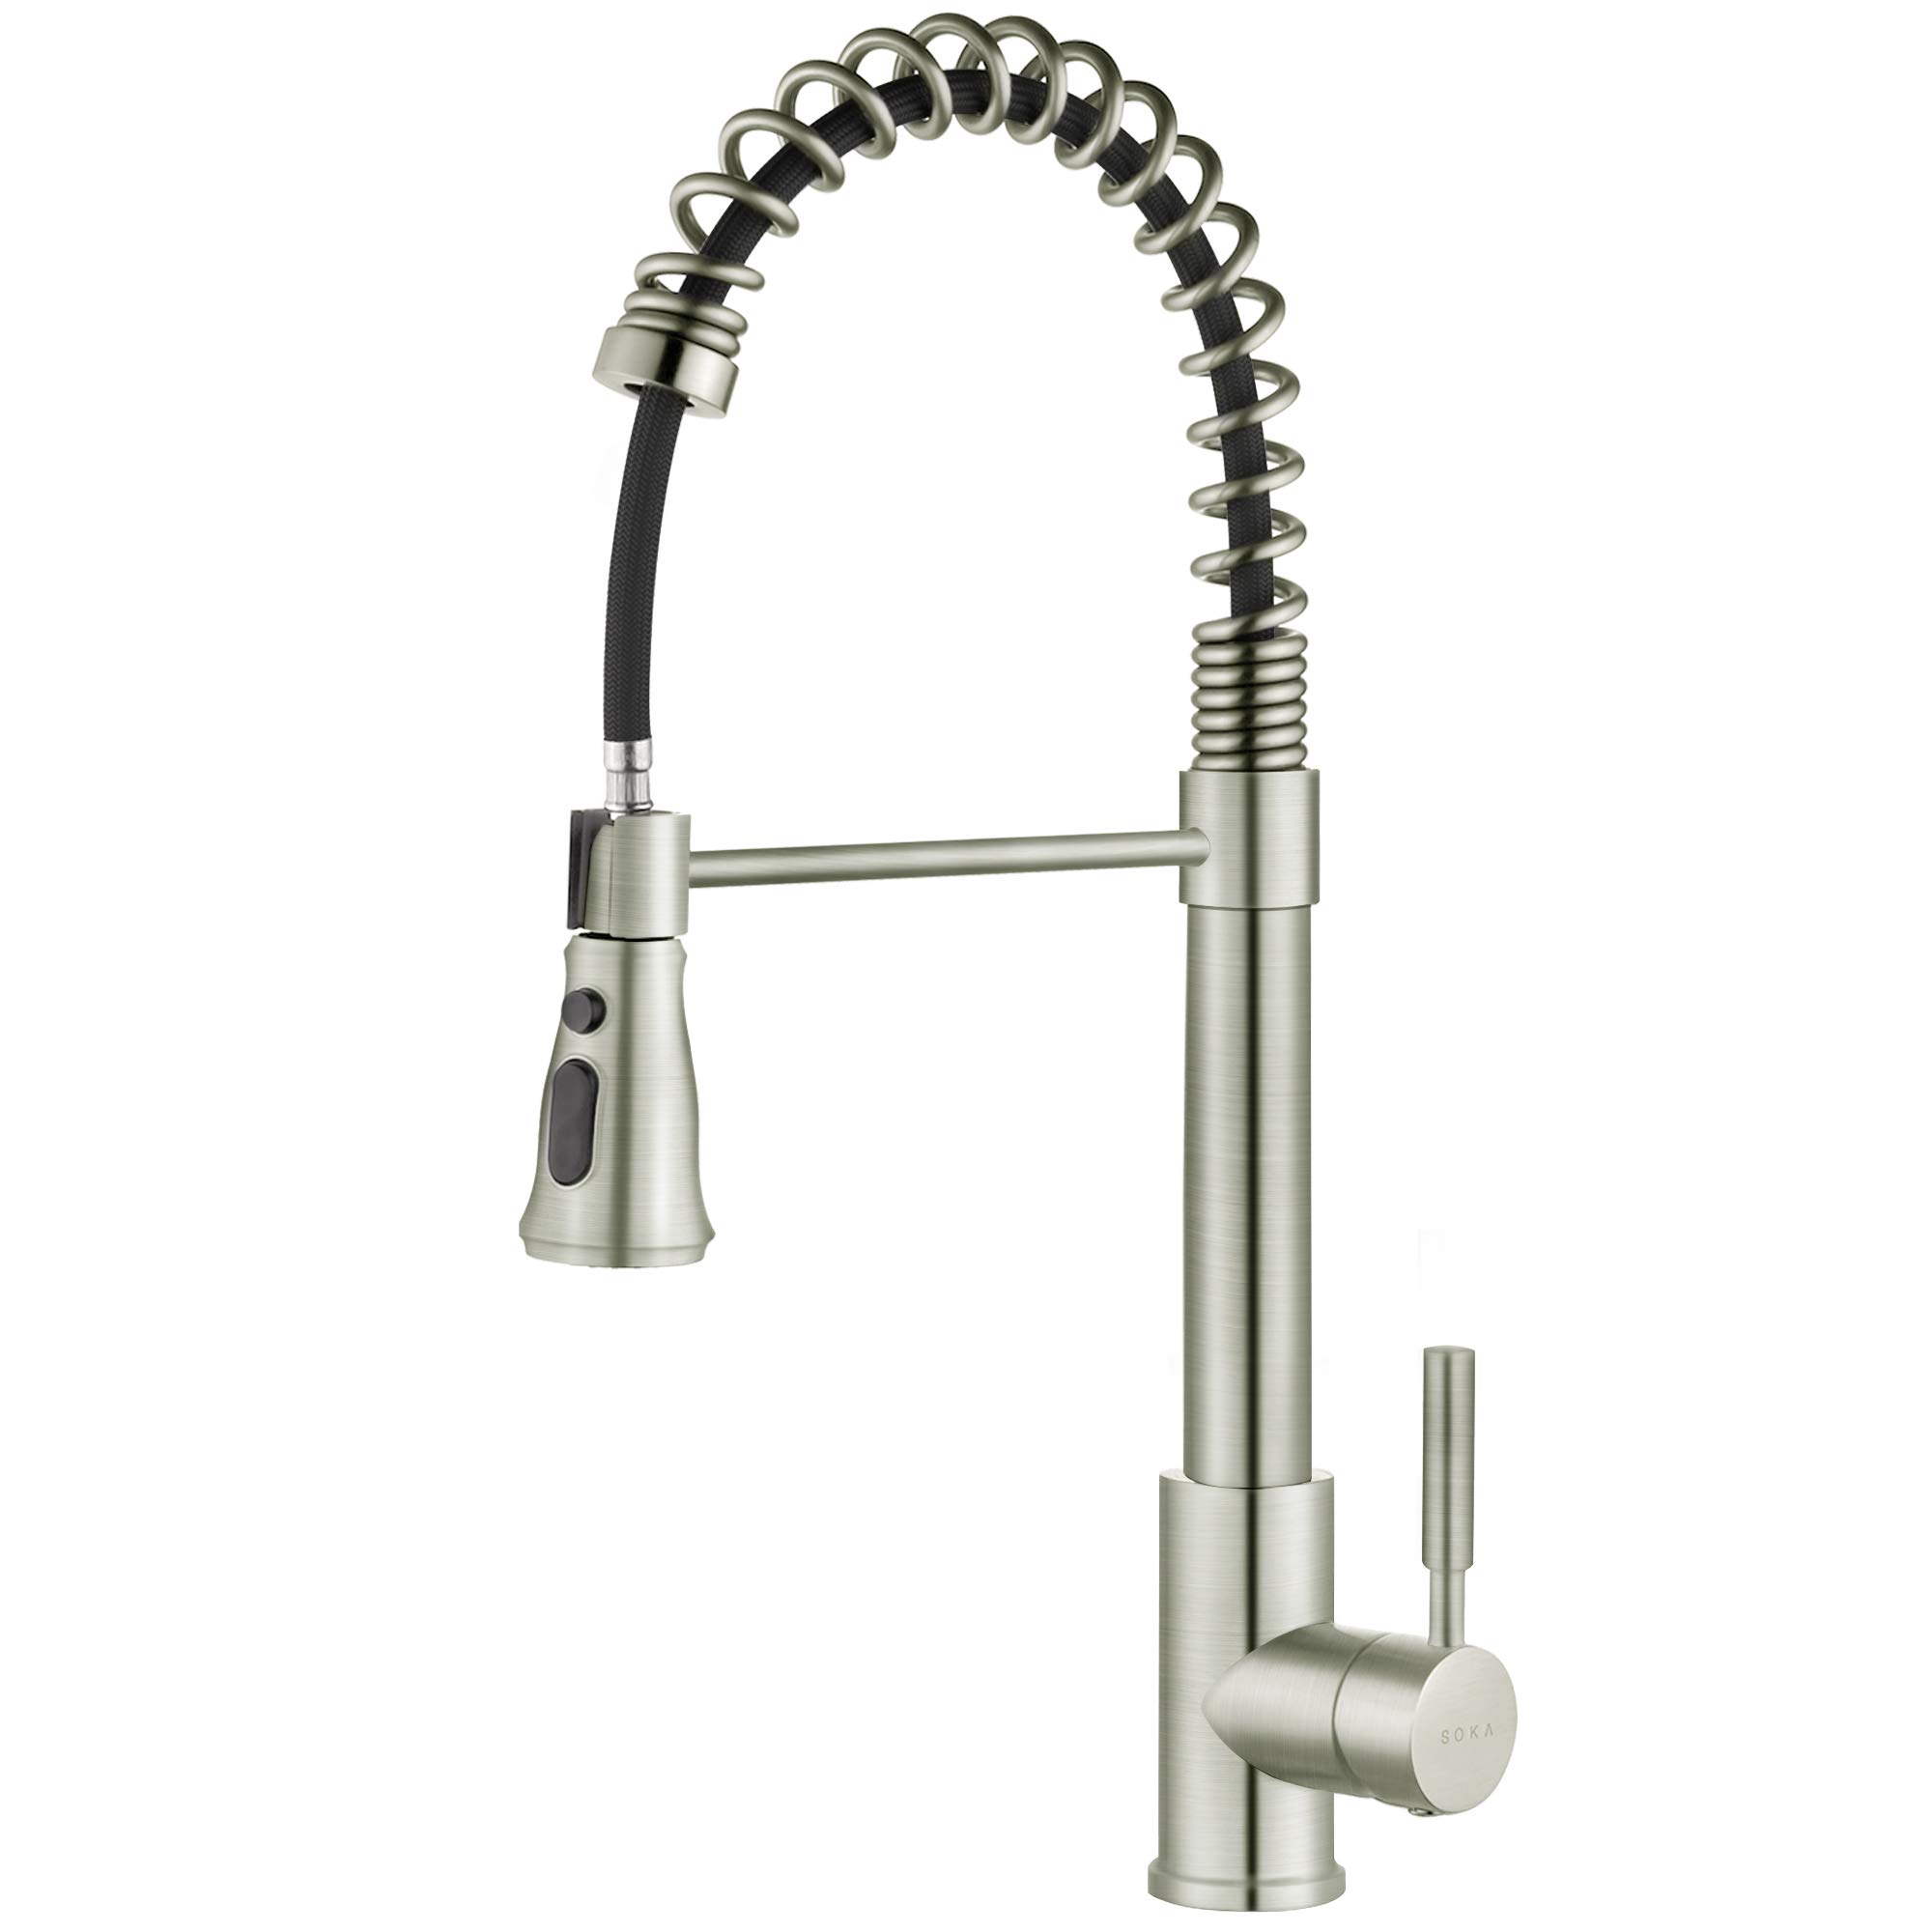 SOKA Single Handle Kitchen Pull Down Faucet with 3 mode sprayer